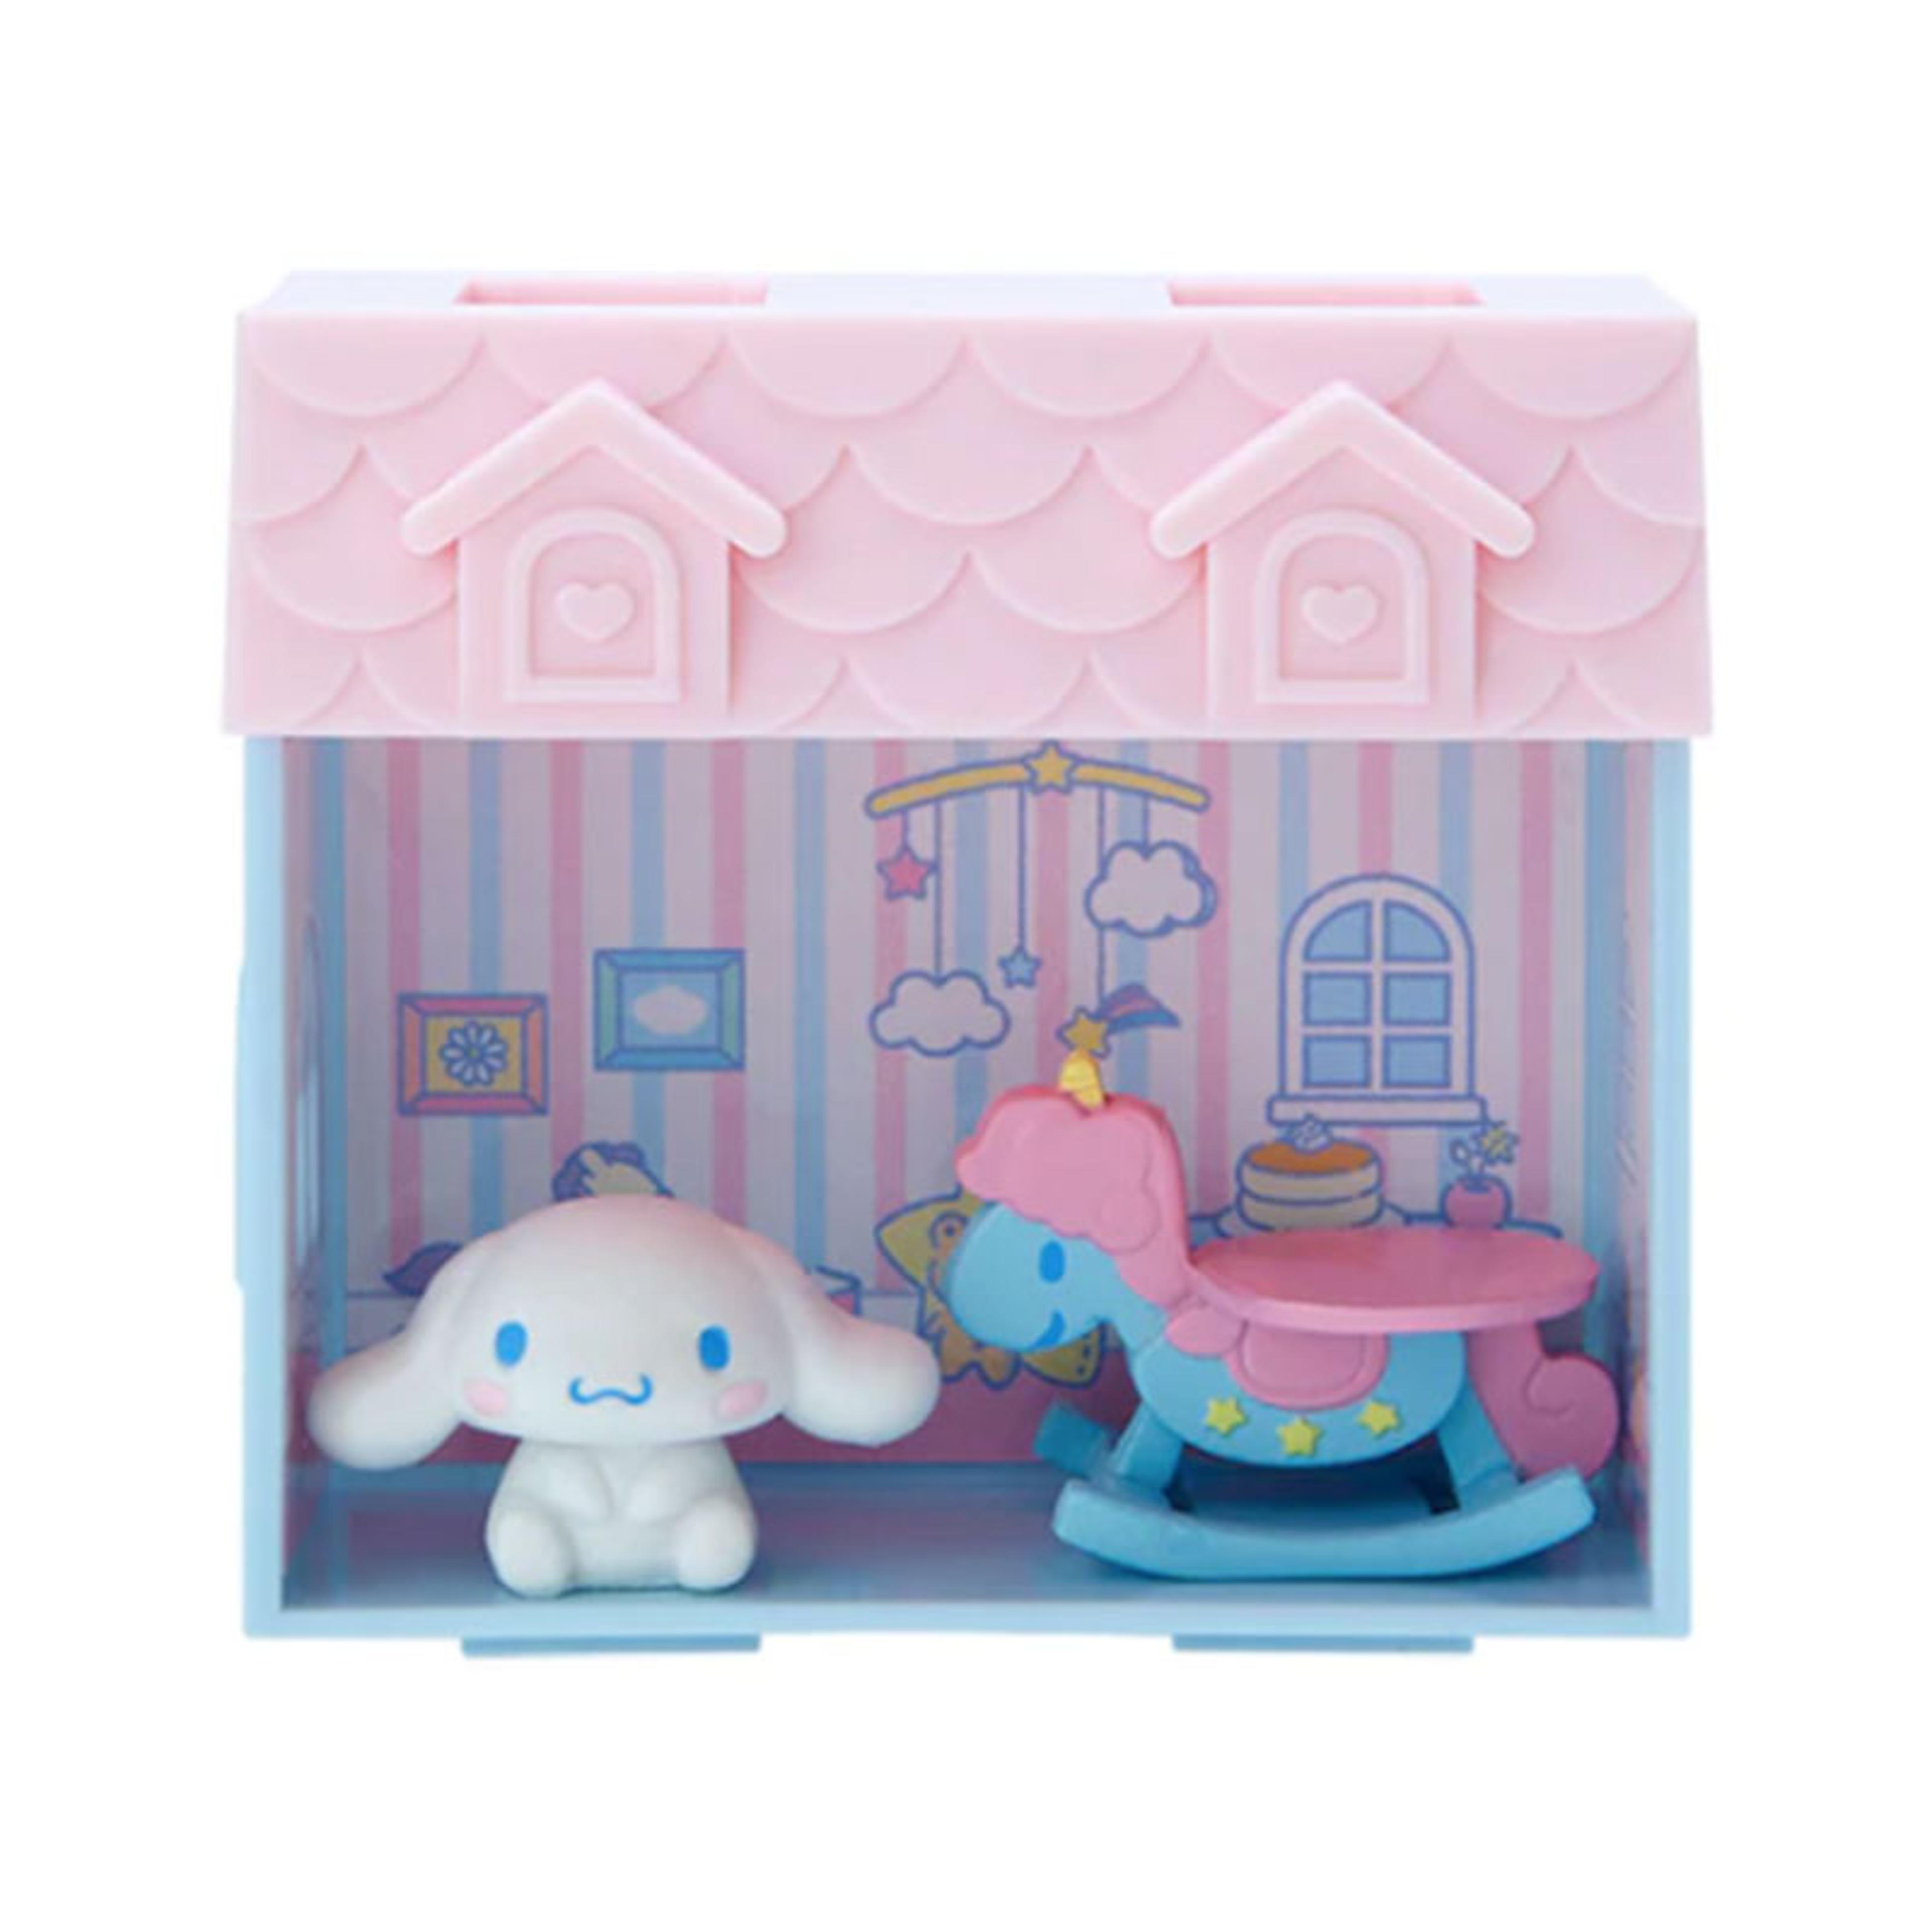 Alternate View 4 of Sanrio Characters Miniature House